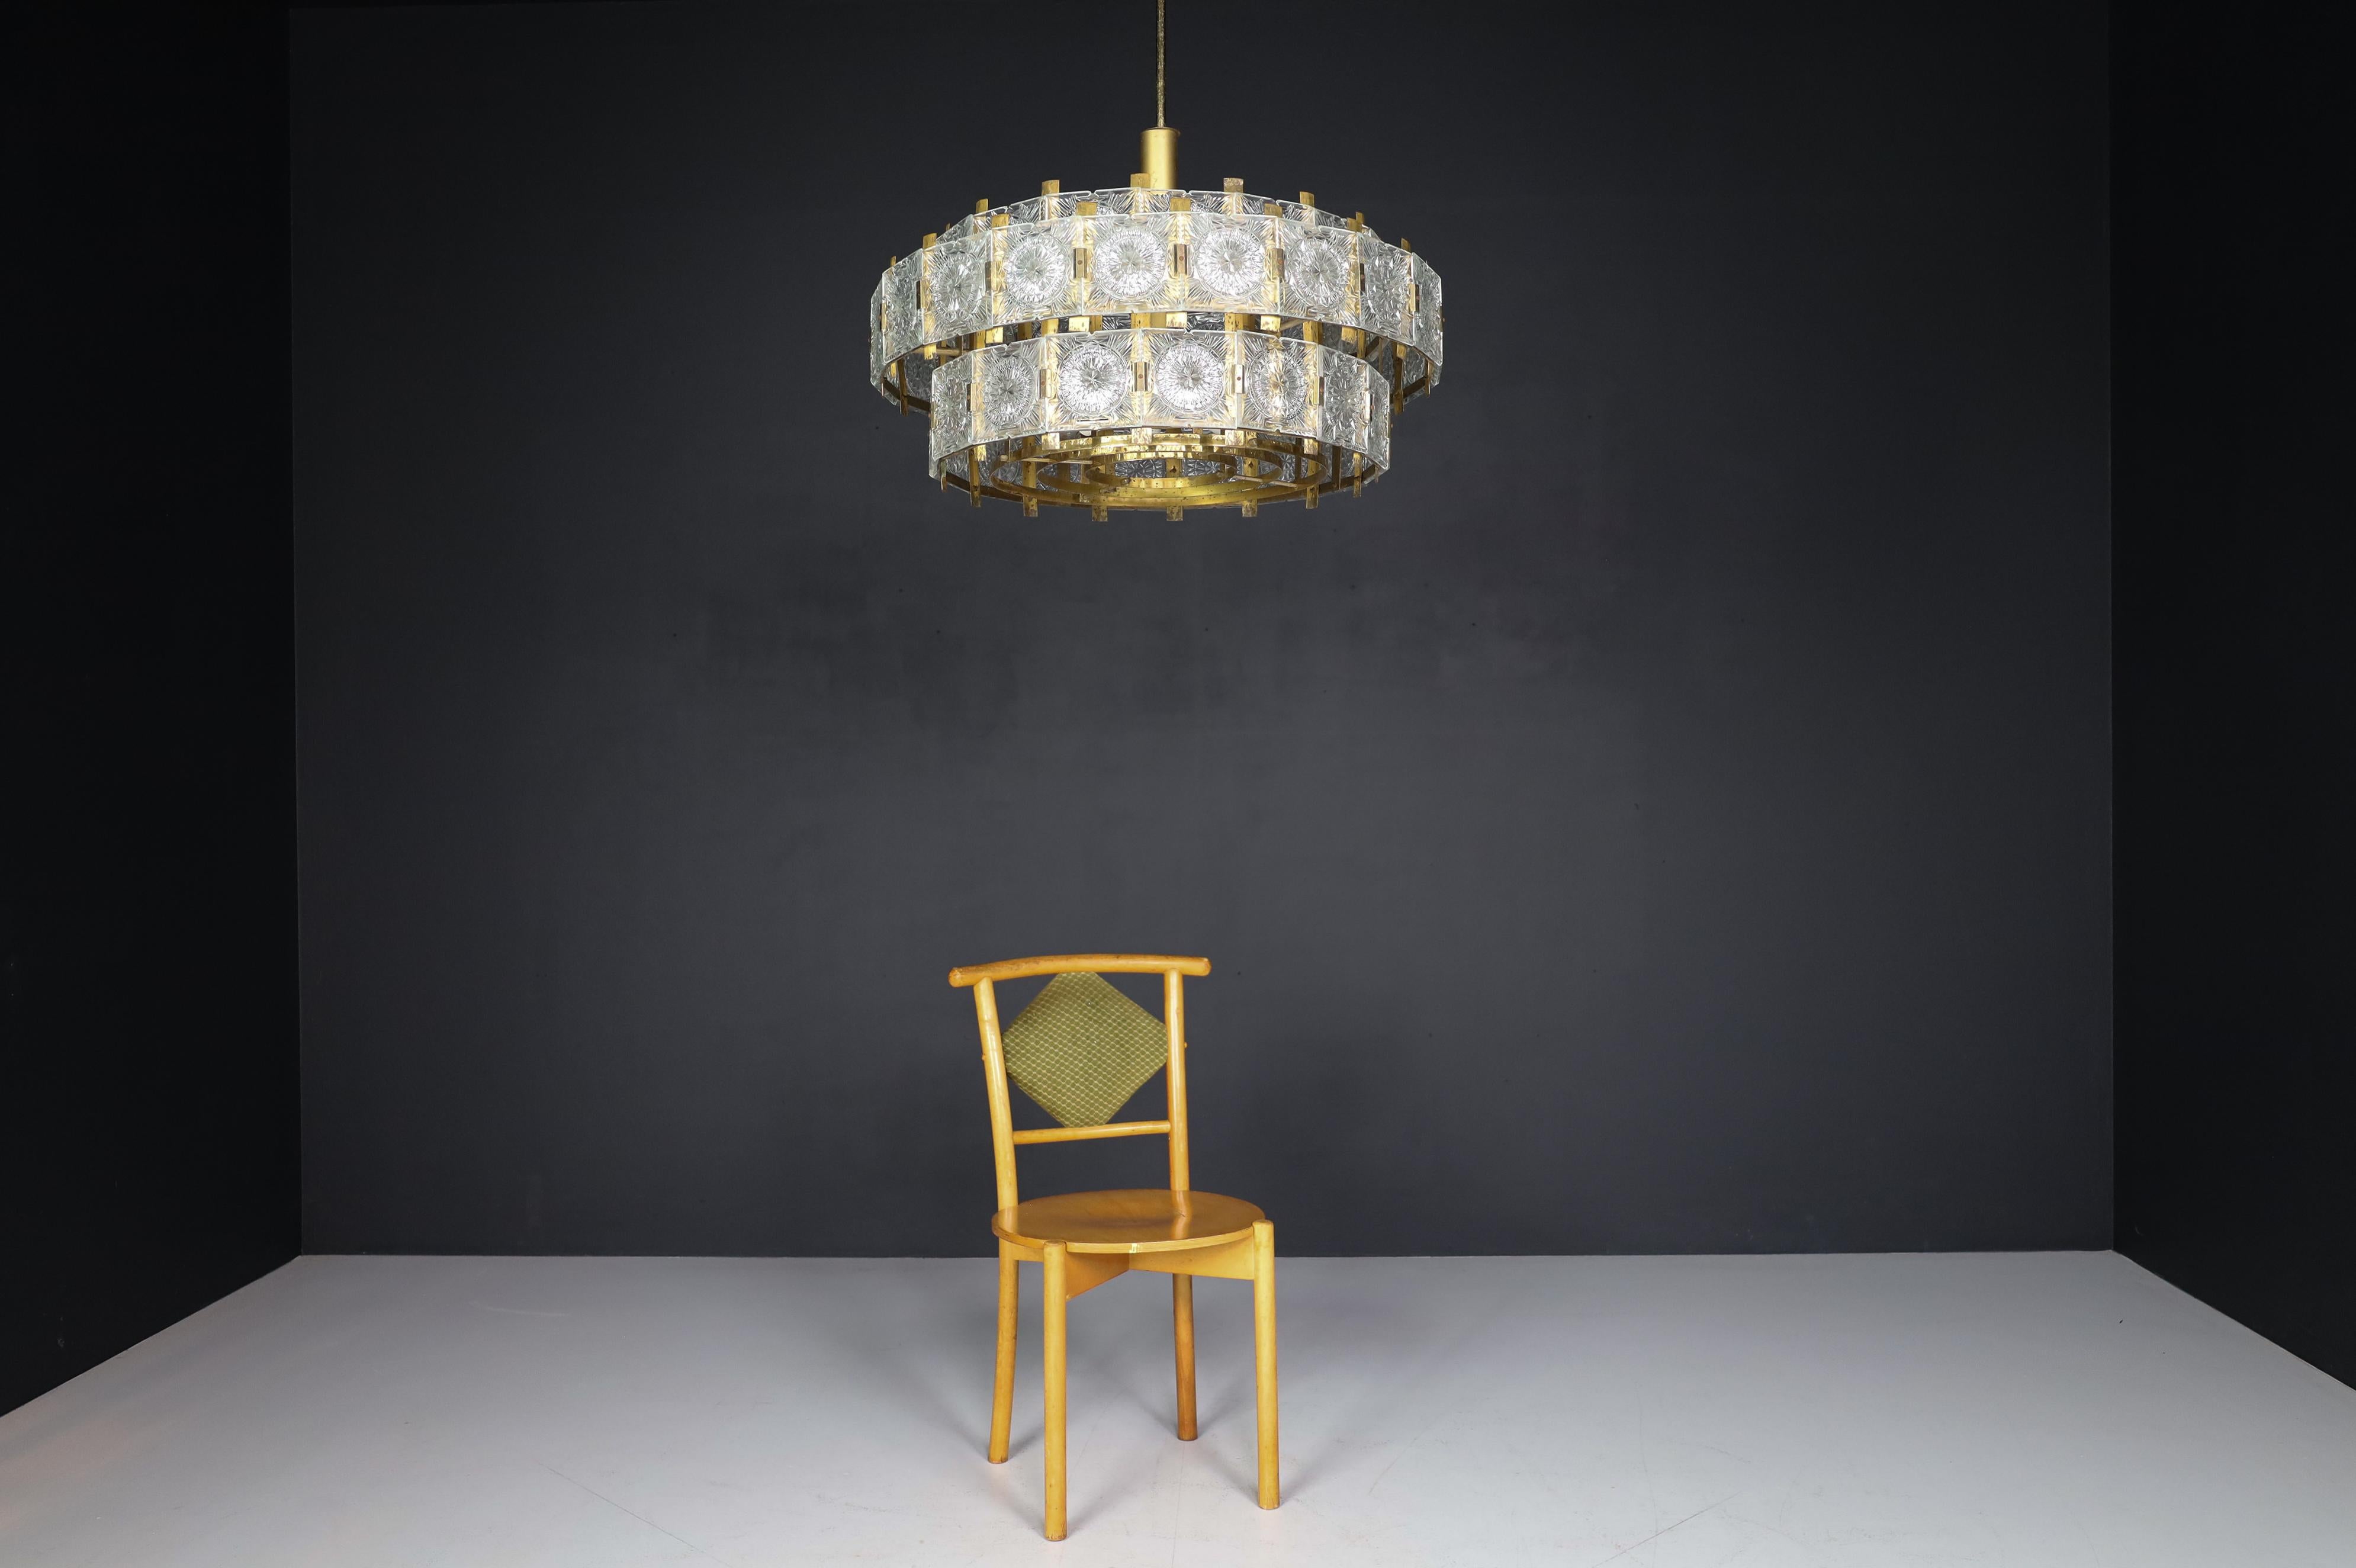 Mid-Century Modern Large Extravagant Chandelier with Patinated Brass Fixture, Praque, 1960s For Sale